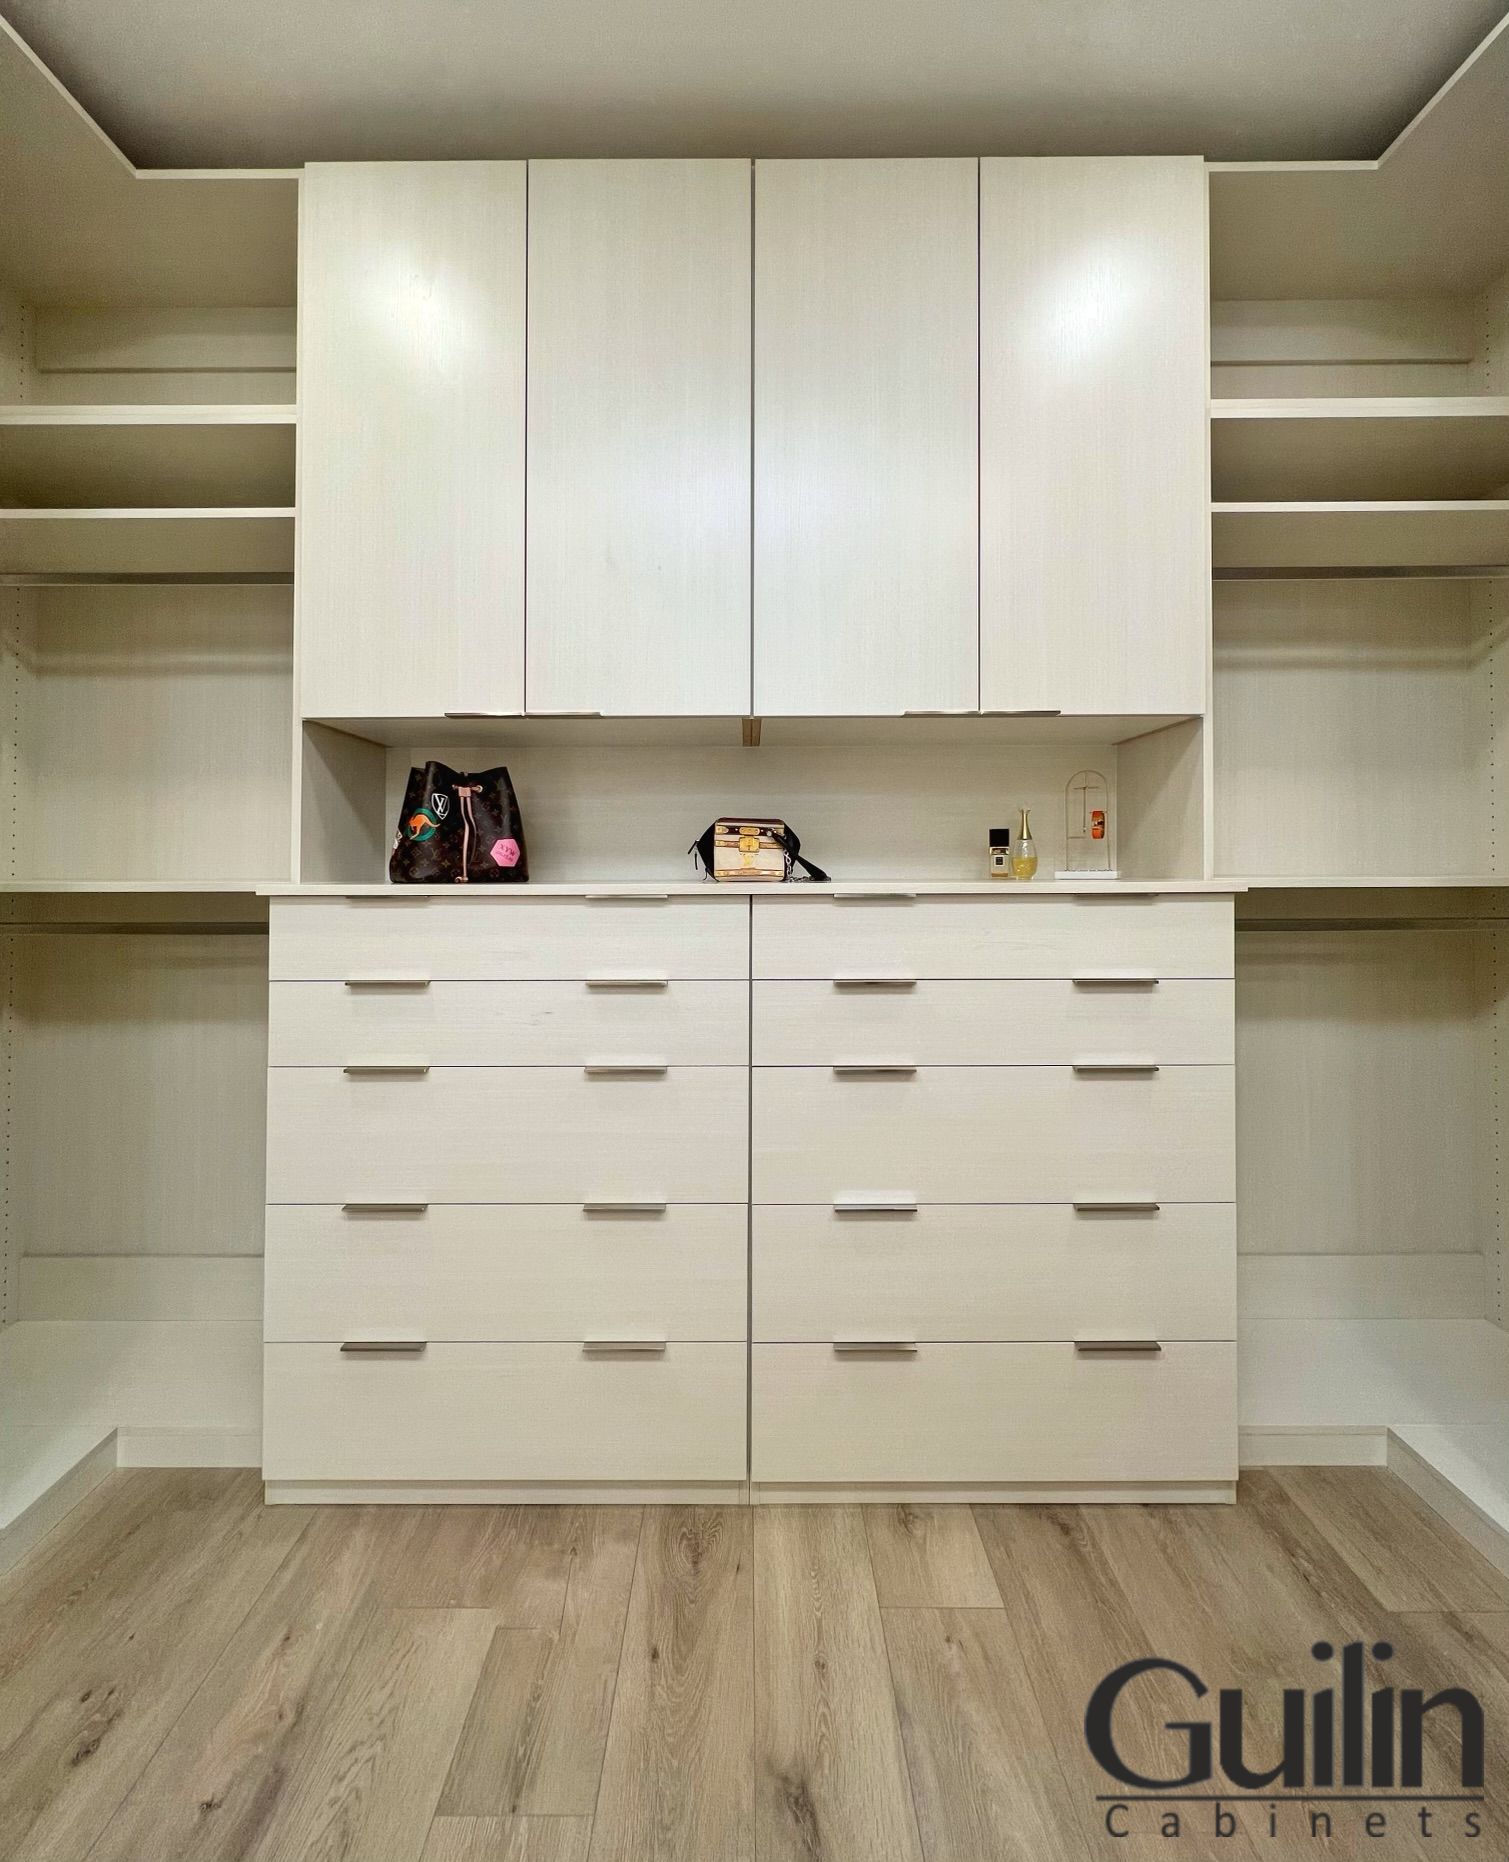 Custom closets are designed to optimize storage and minimize clutter.